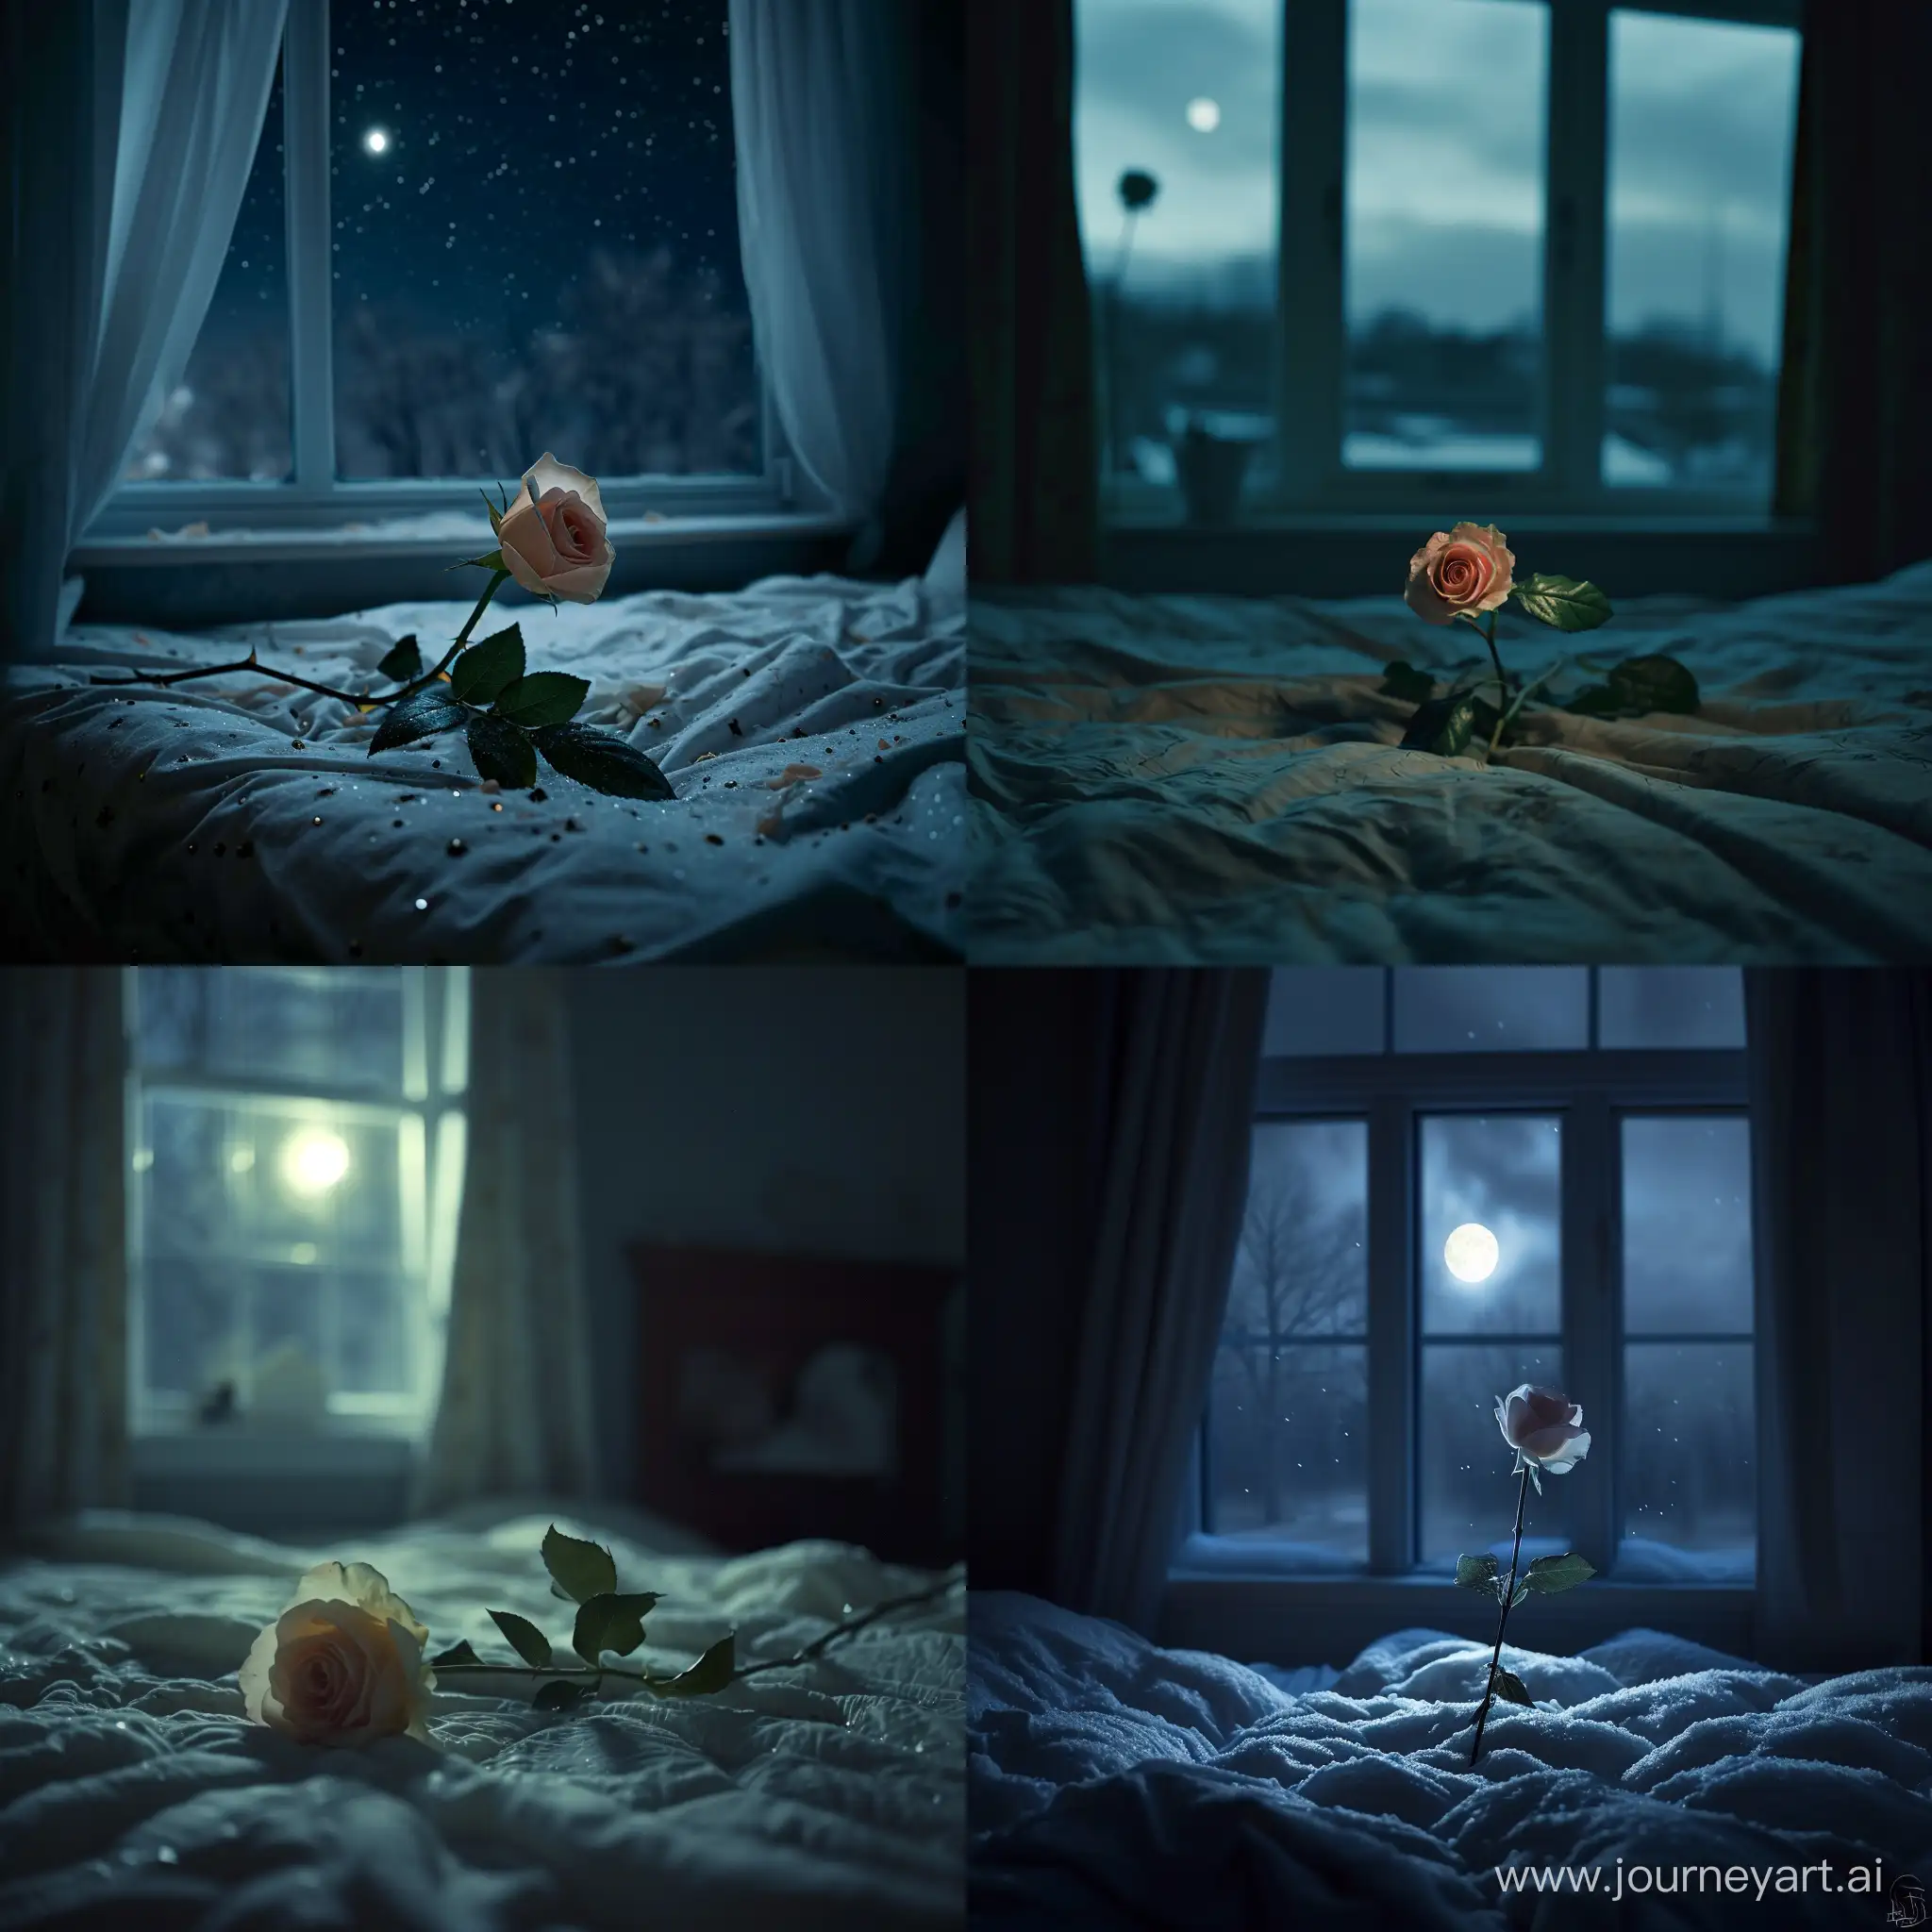 one rose flower on a spread-out bed in a dark bedroom, the light of the moon and stars from the window, a winter night